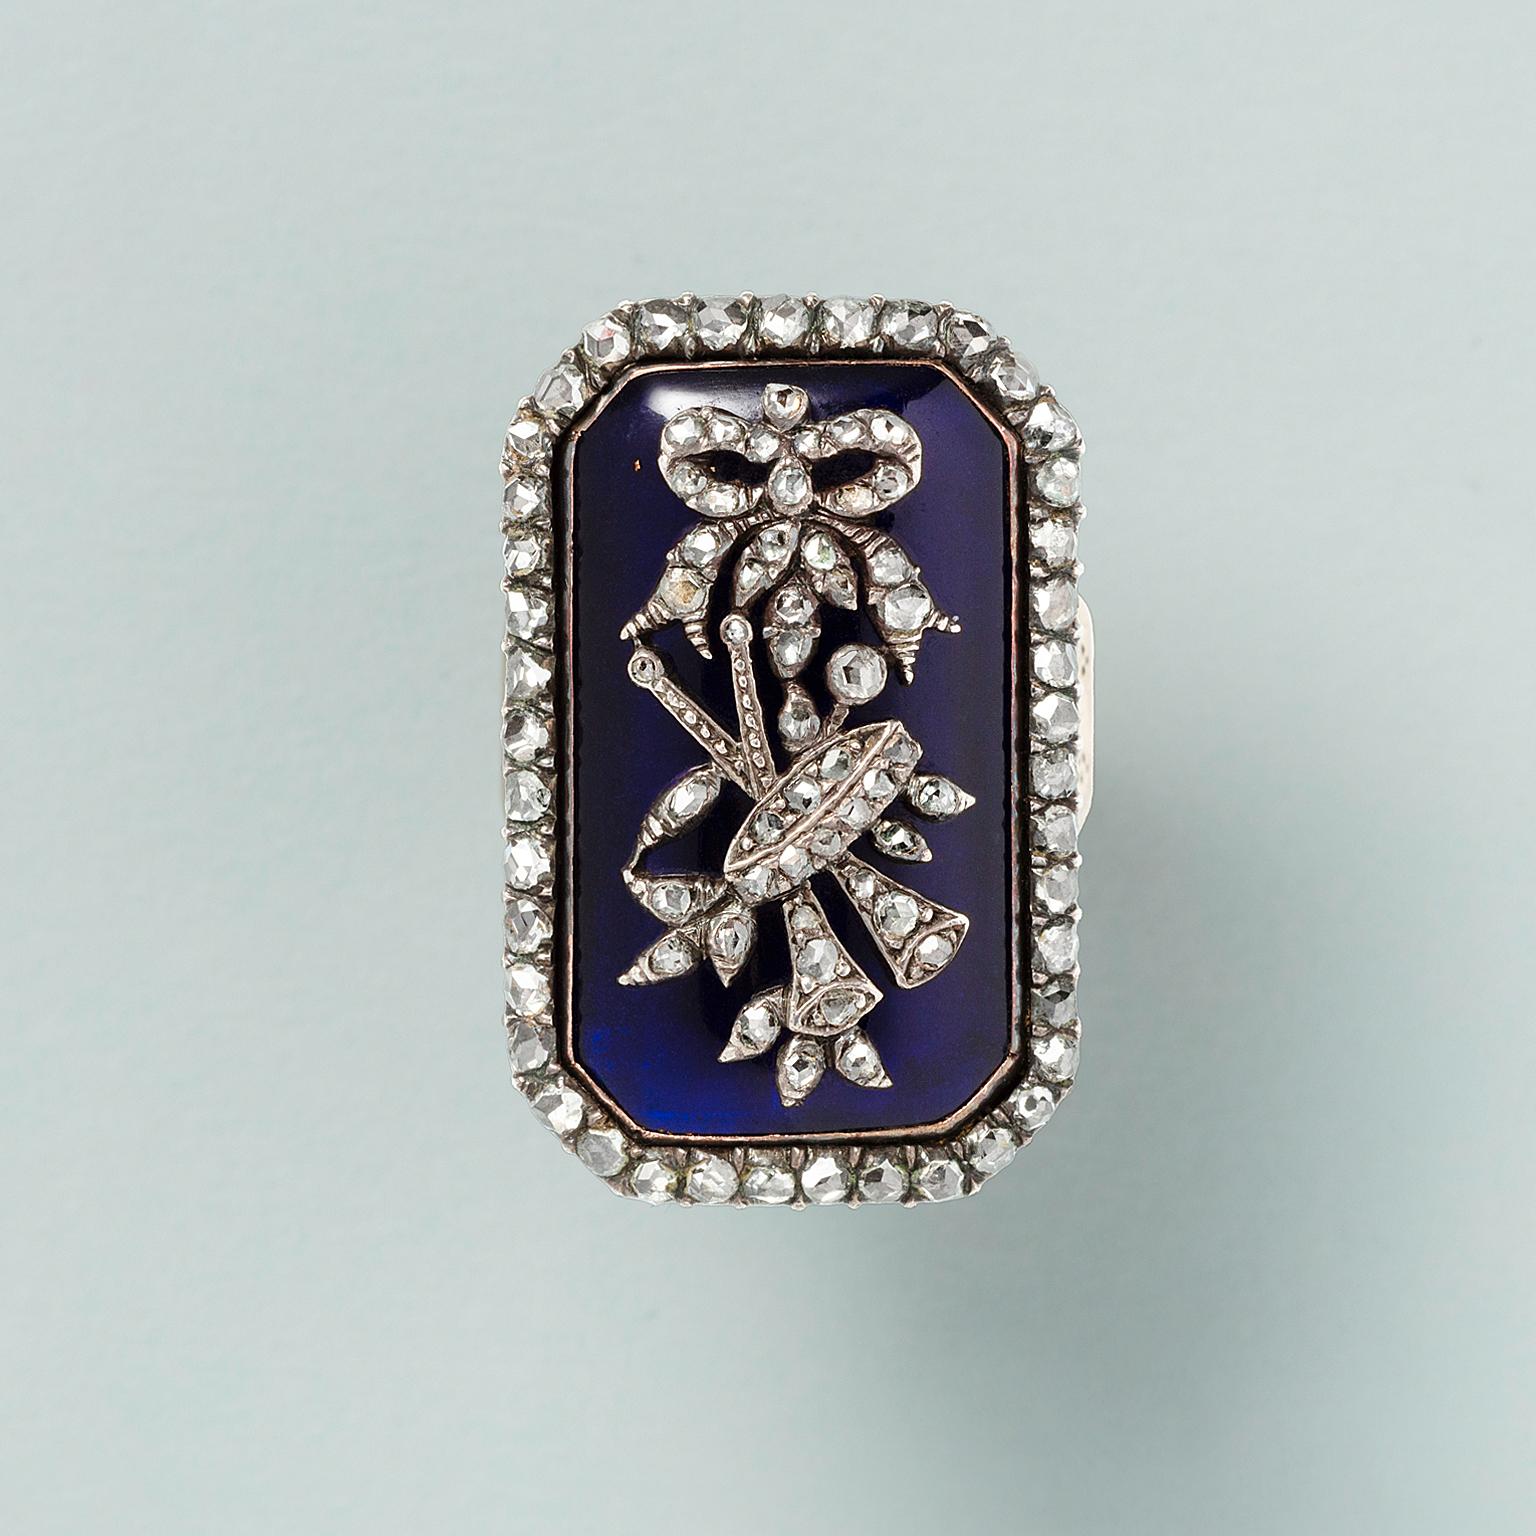 A gold and silver ring with a demountable octagonal panel set with an row of rose cut diamonds around a transparant blue glass panel with an silver ornament set with rose cut diamonds featuring  a bow followed and musical intruments and leaves. 18th